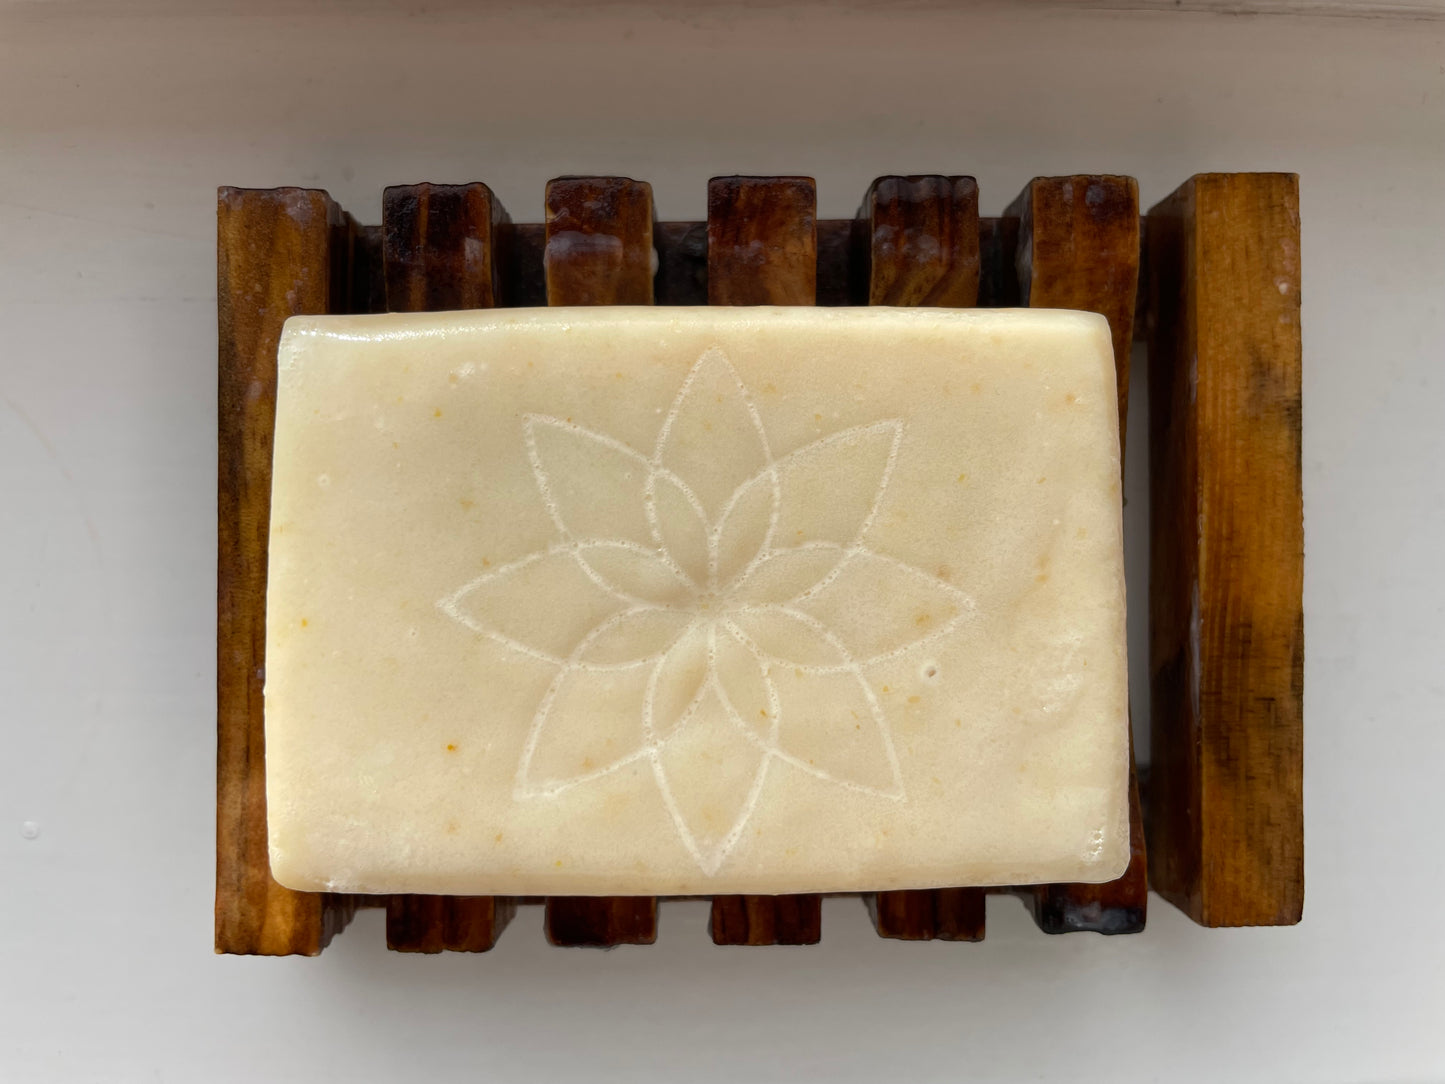 Honey and Oat unscented soap bar, naked, for a natural beauty feeling, on a wooden soap dish